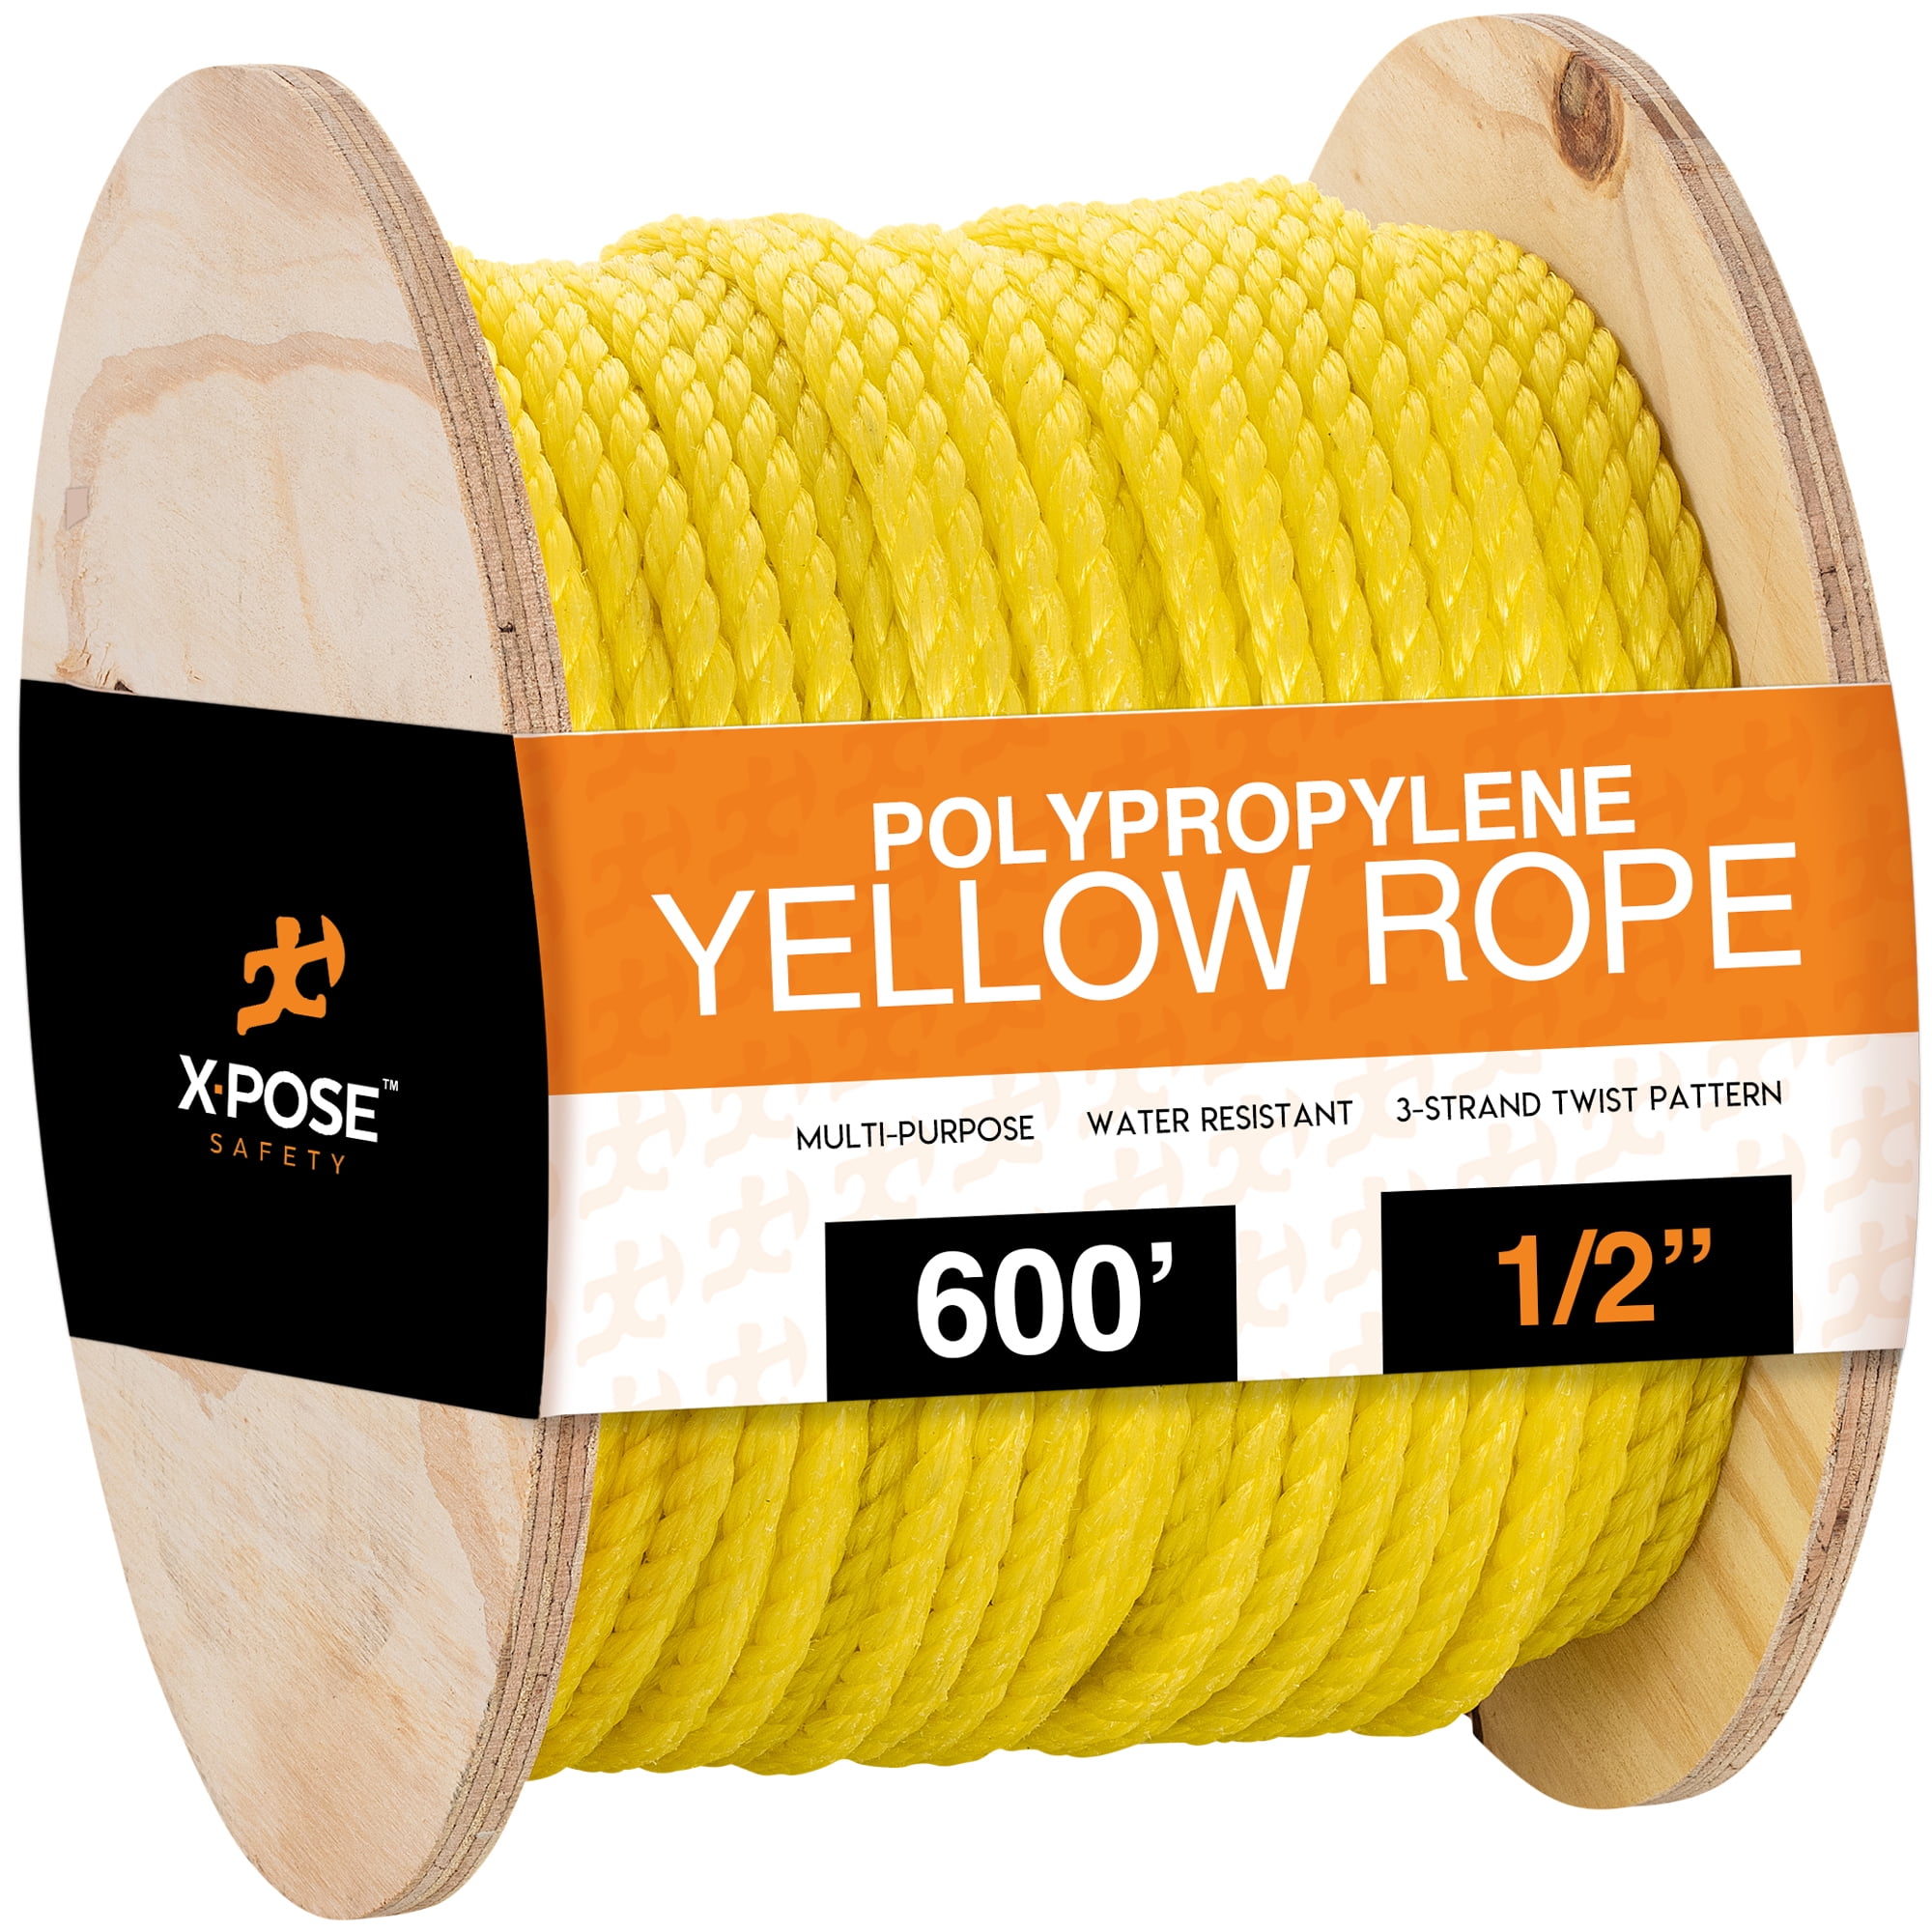 50 ft Twisted Polypropylene Rope - 1/4 - Yellow Floating Poly Pro